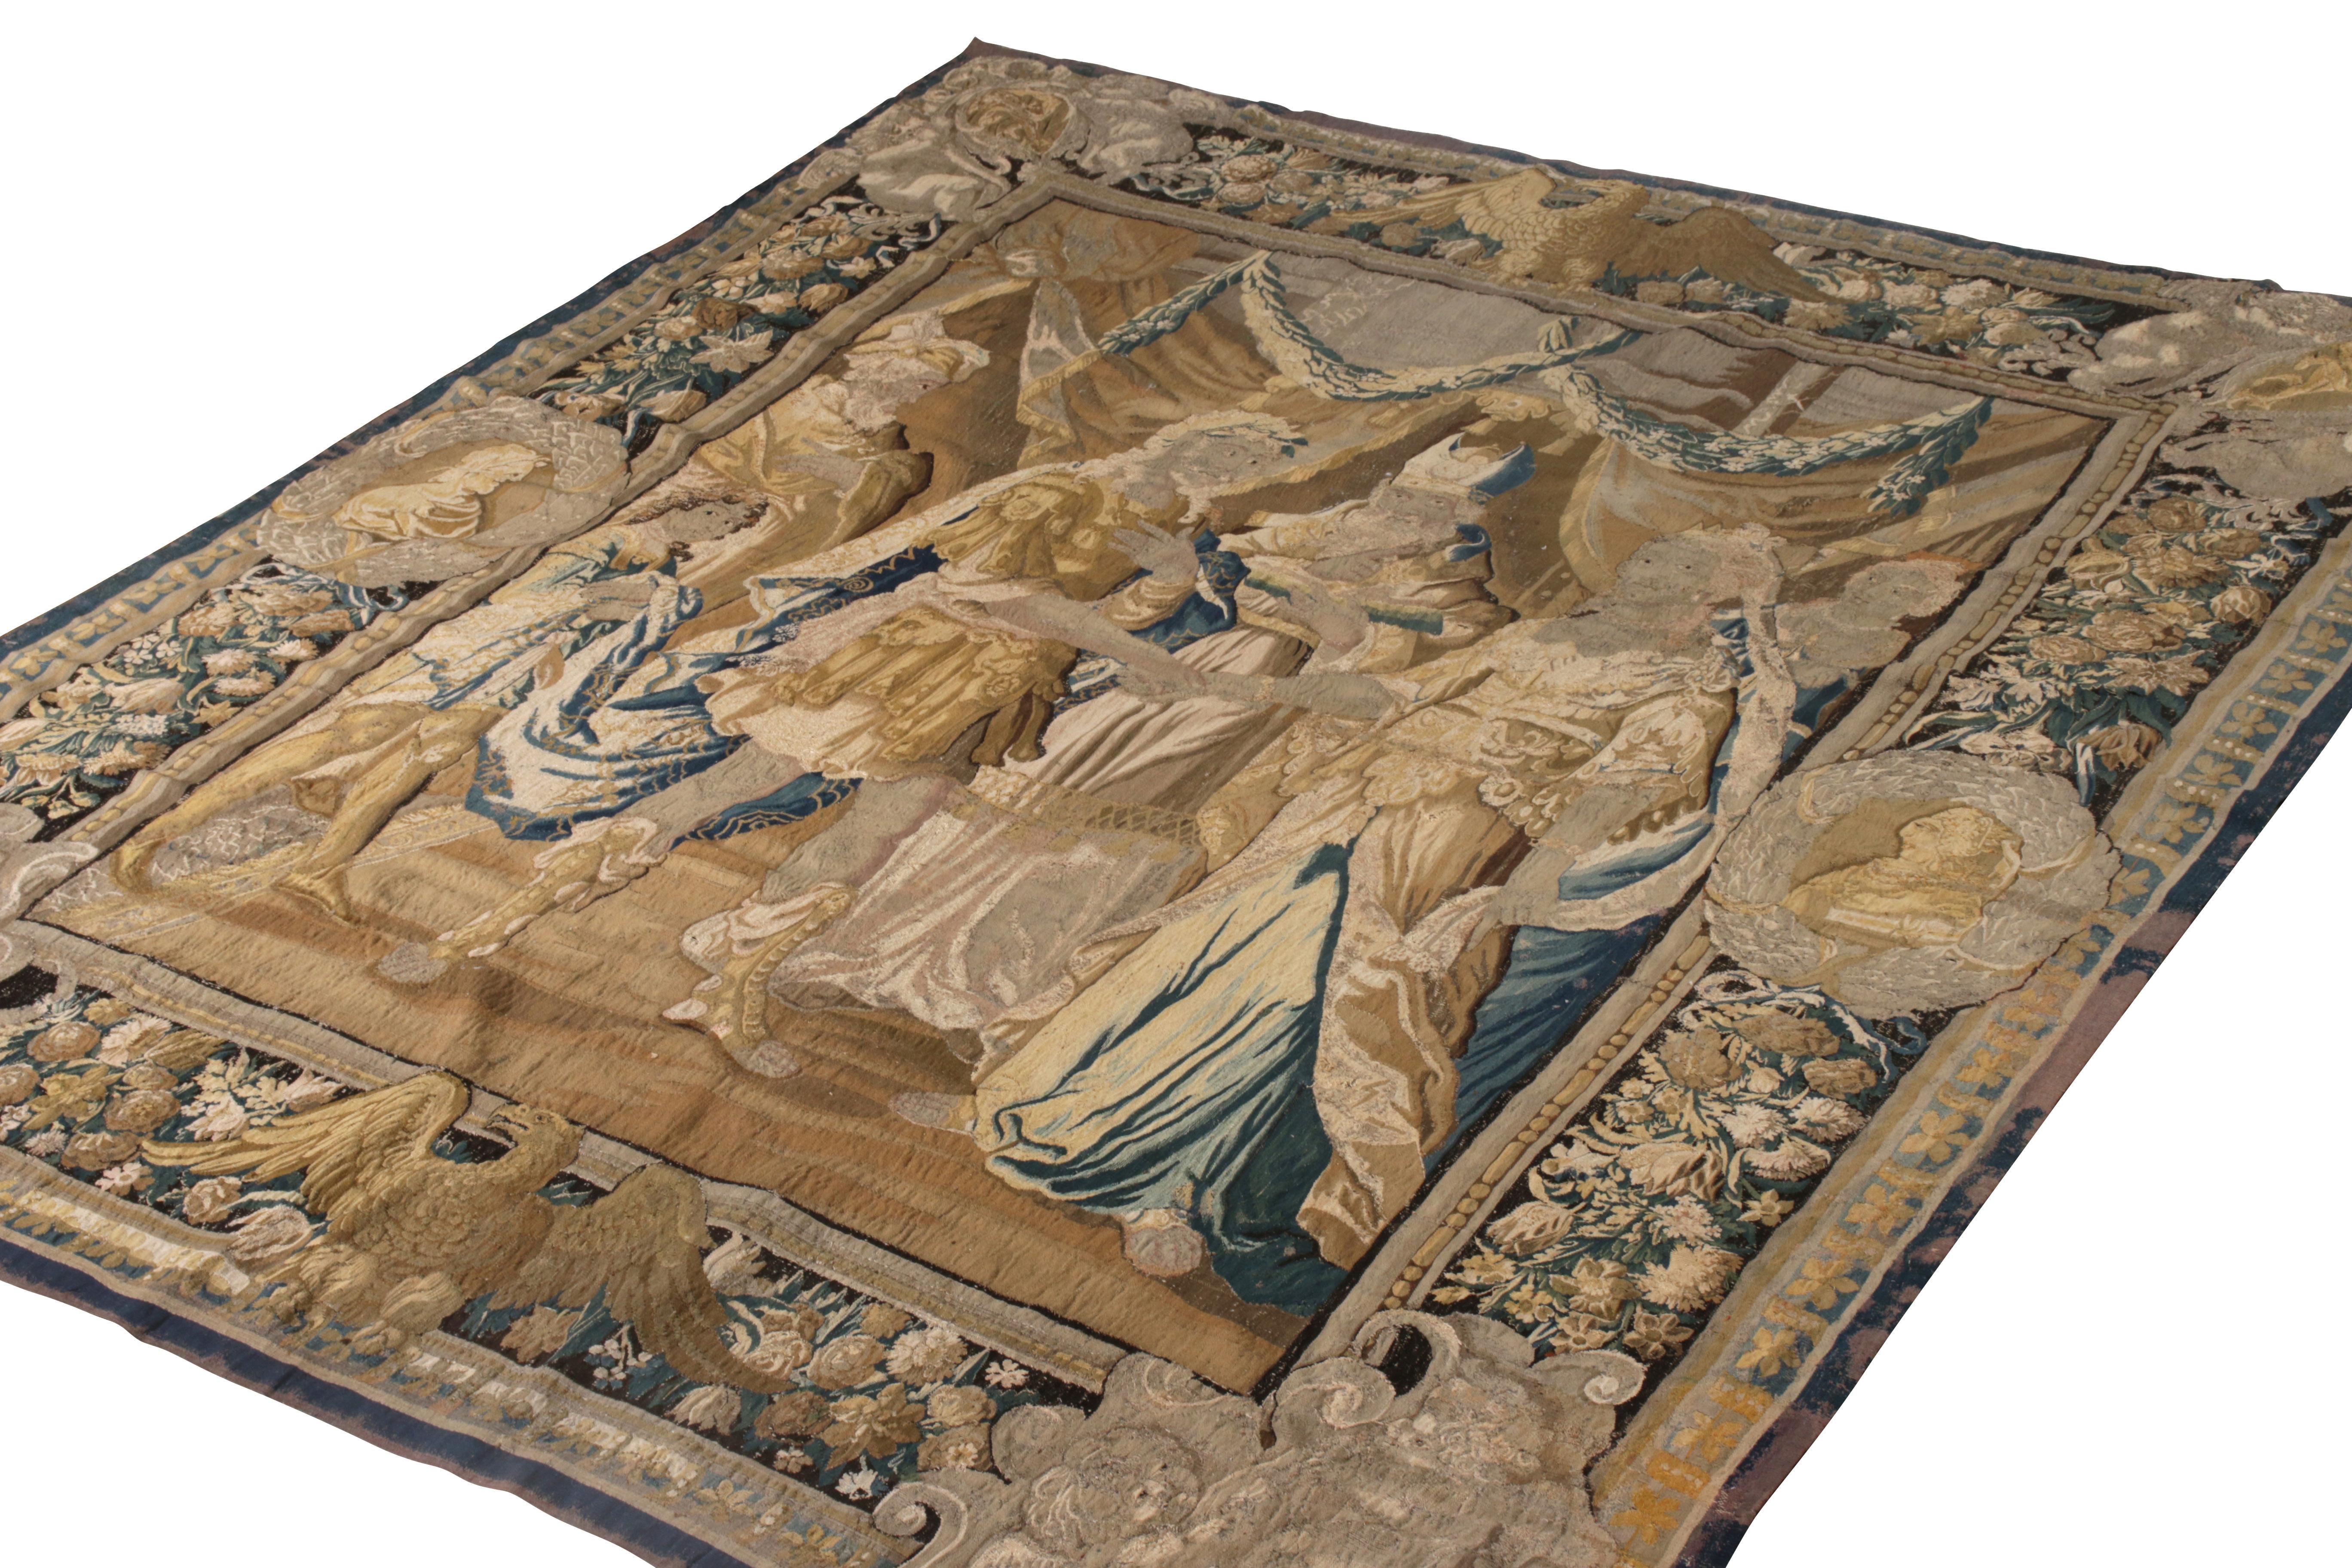 A 9 x 11 antique French tapestry of distinguished pictorial design, enjoying a play of beige-brown and blue with gold accents. Known among connoisseurs as a Heraldic design, handmade in France originating, circa 1900-1910.

On the design: The